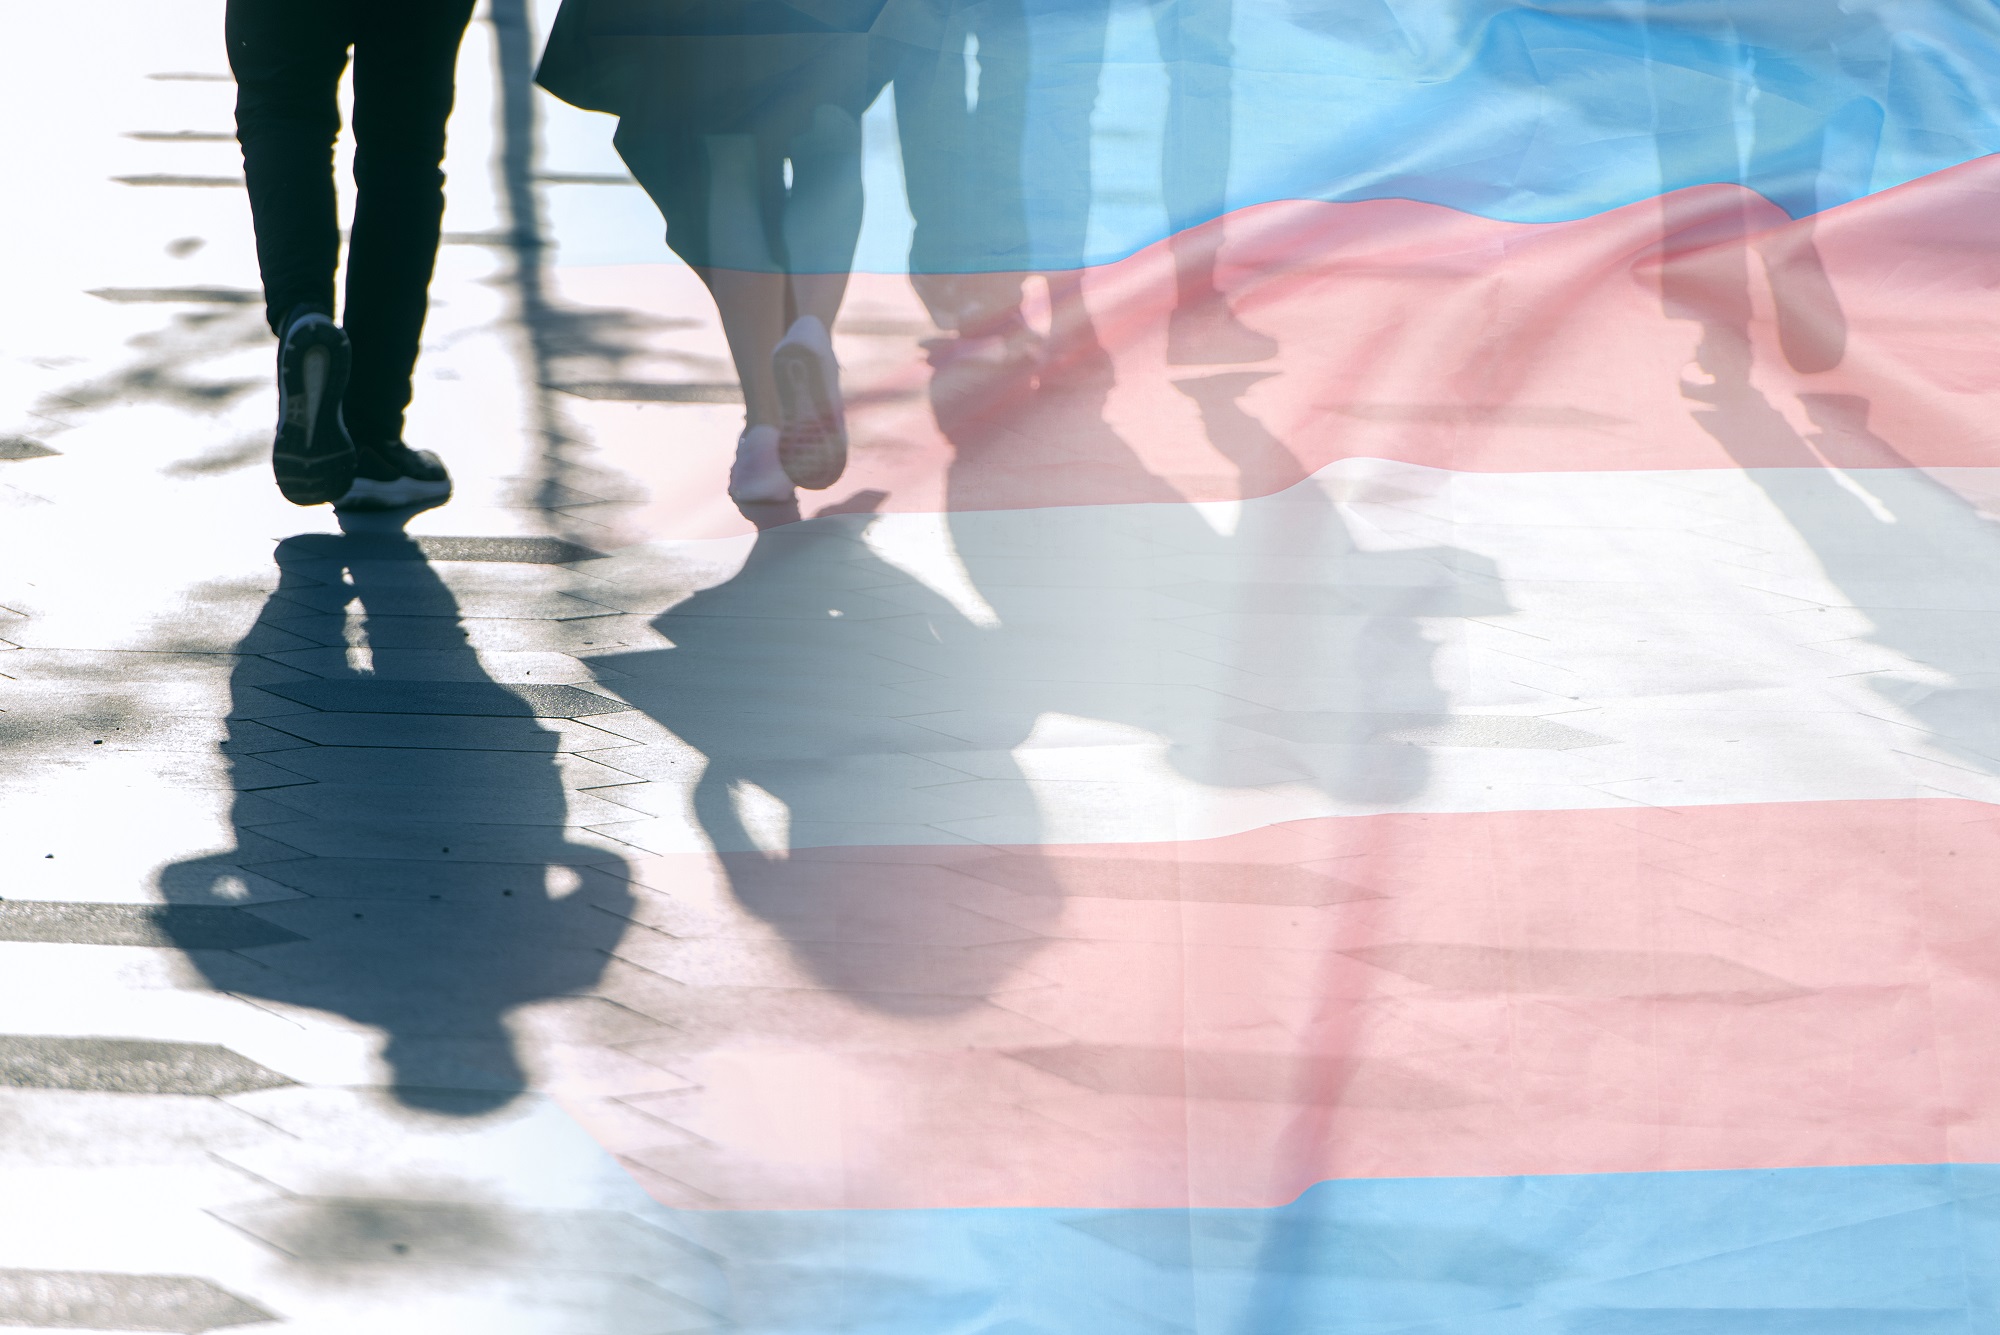 Transgender rights in the workplace - what employers need to know